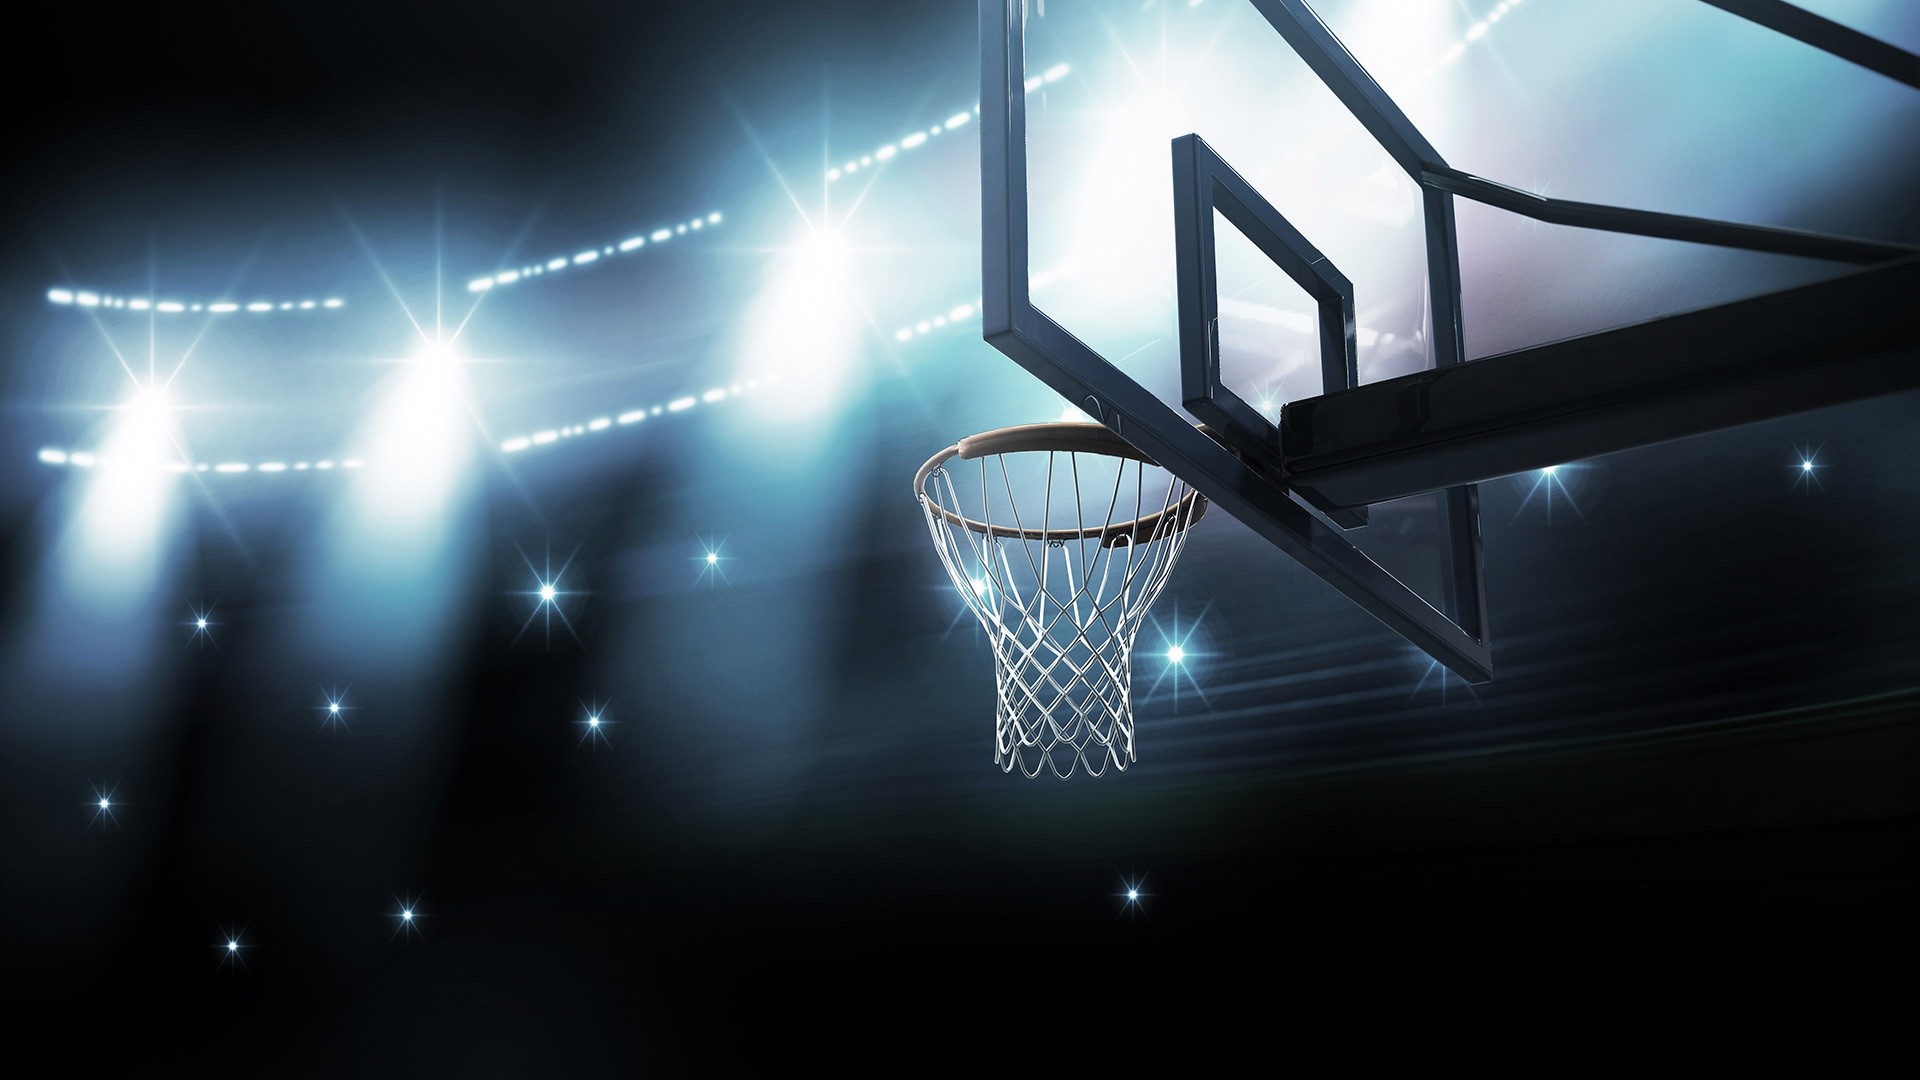 1920x1080 ... 25 Basketball Wallpapers, Backgrounds, Images,Pictures | Design .